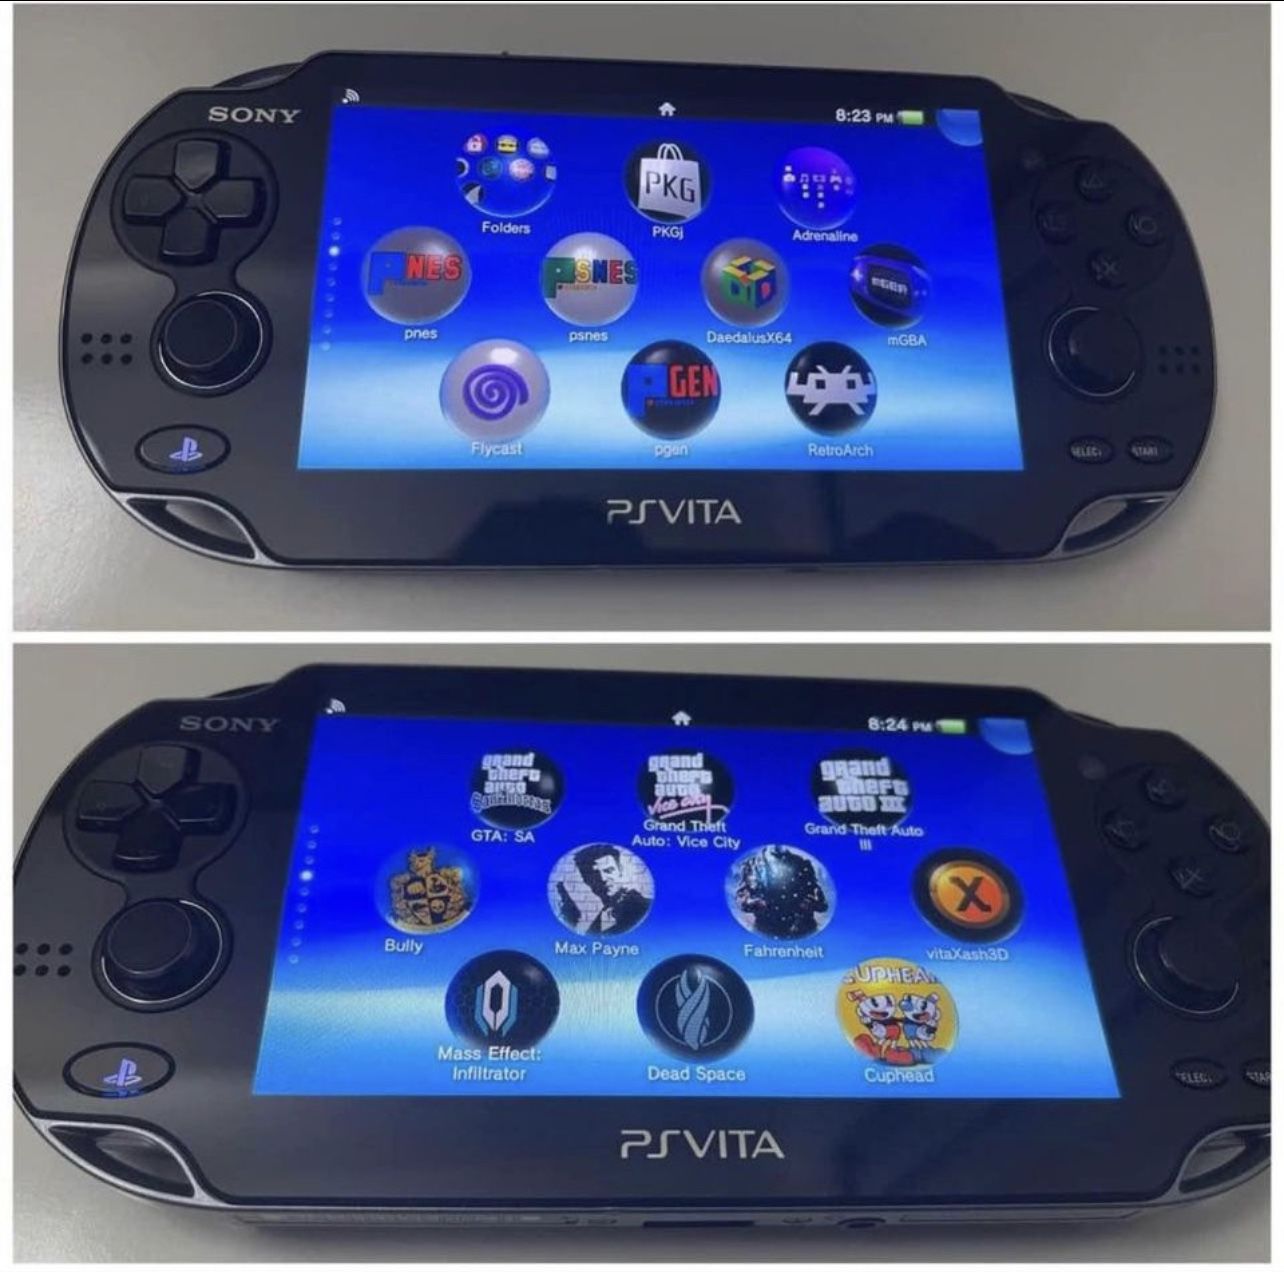 Sony PlayStation PS Vita - OLED (PCH-1001) Firmware FW 3.65 